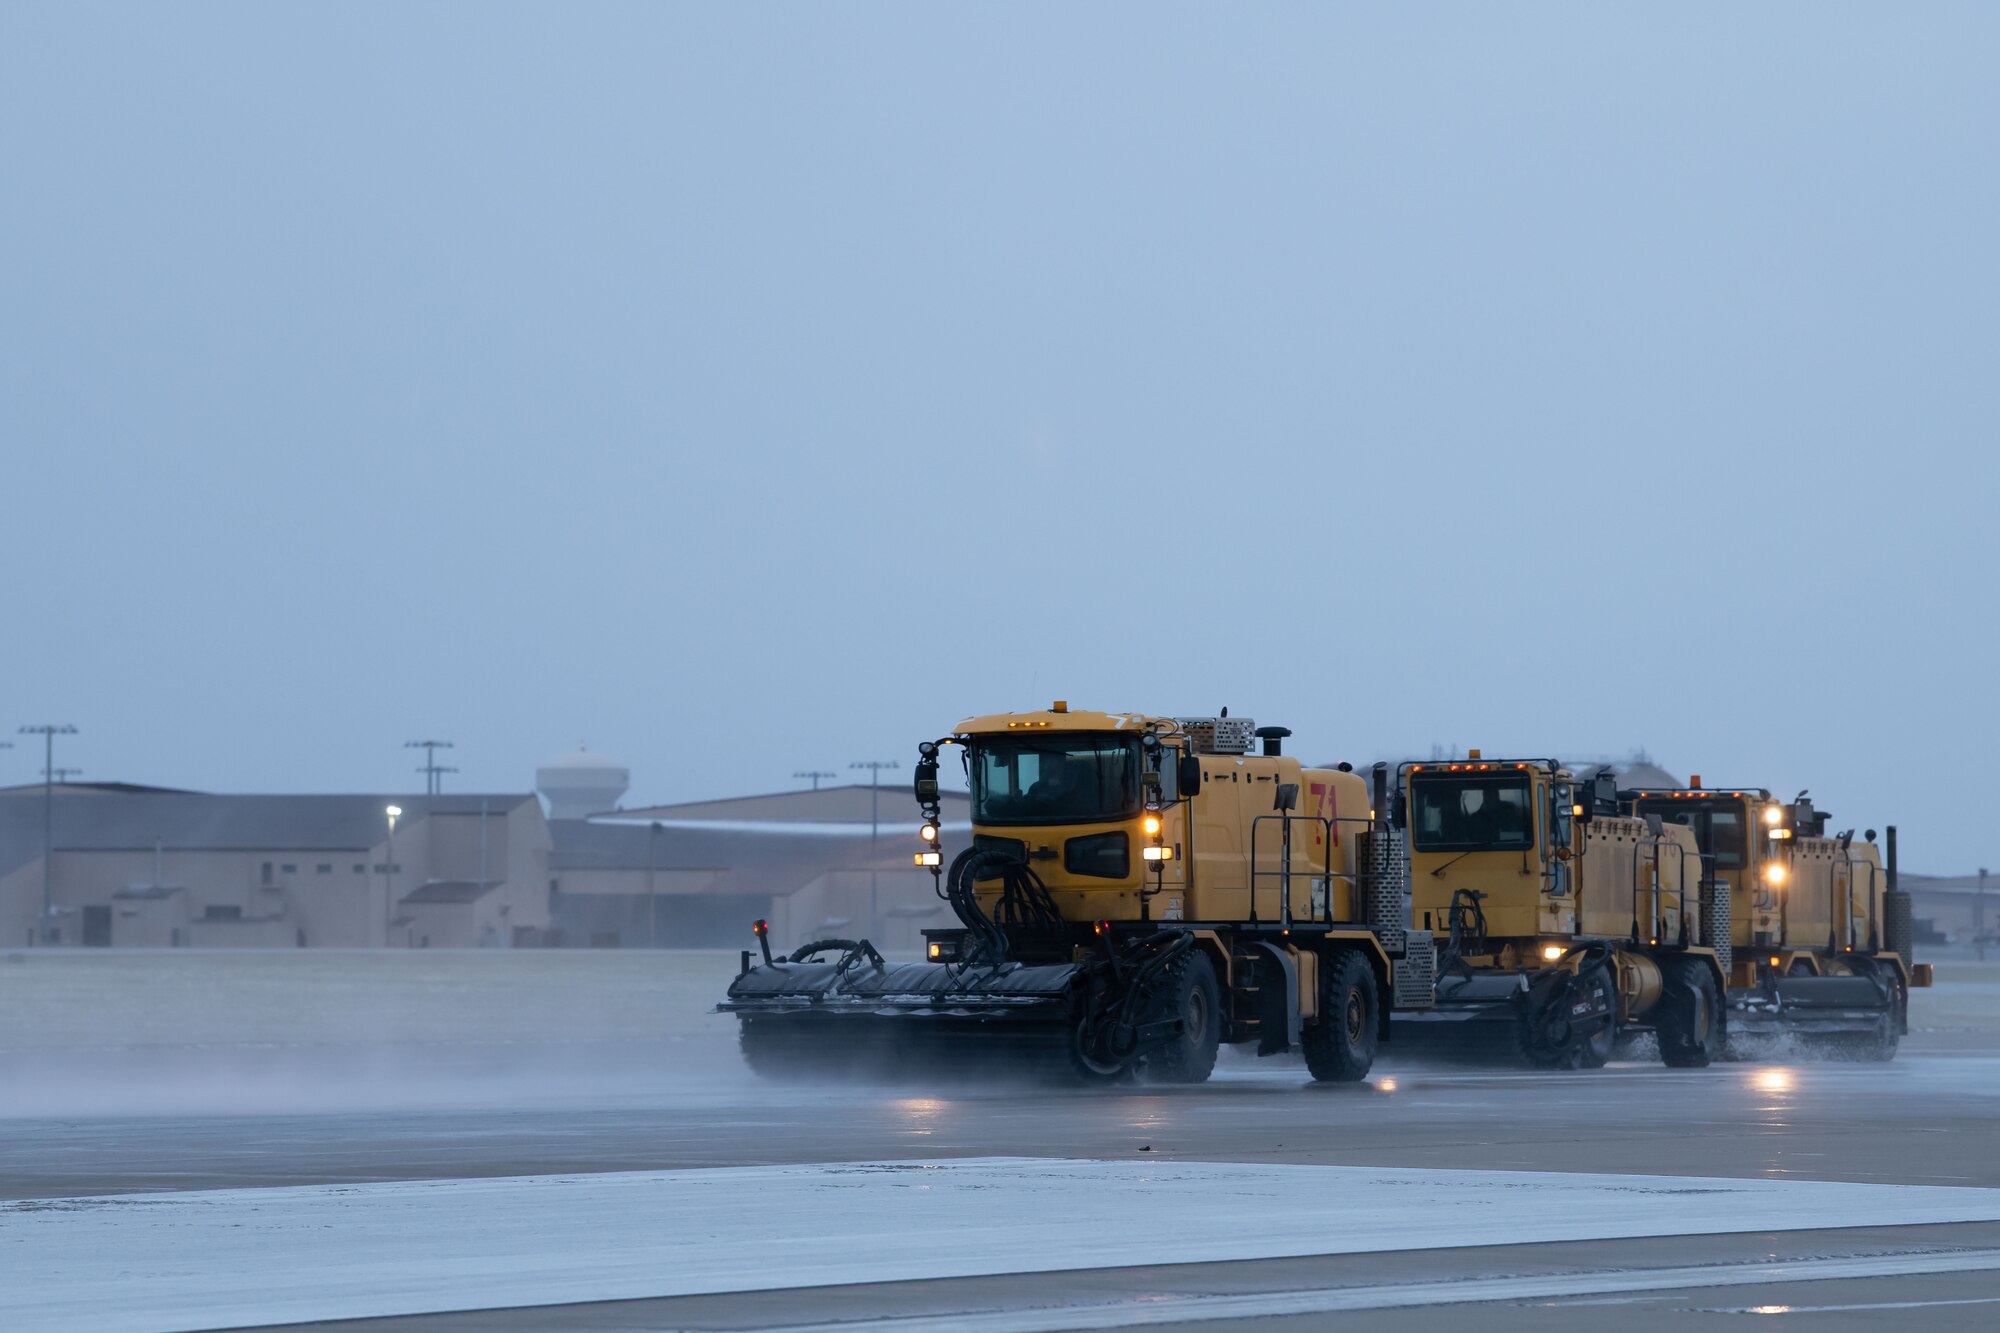 Members of the 28th Civil Engineering Squadron Dirt Boyz drive Oshkosh H-series trucks with front-mounted sweepers to scrub the runway of Ellsworth Air Force Base, S.D., April 24, 2022.
The Dirt Boyz make multiple passes up and down the runway until all dangerous rubber deposits have been removed. (U.S. Air Force photo by Airman 1st Class Adam Olson)